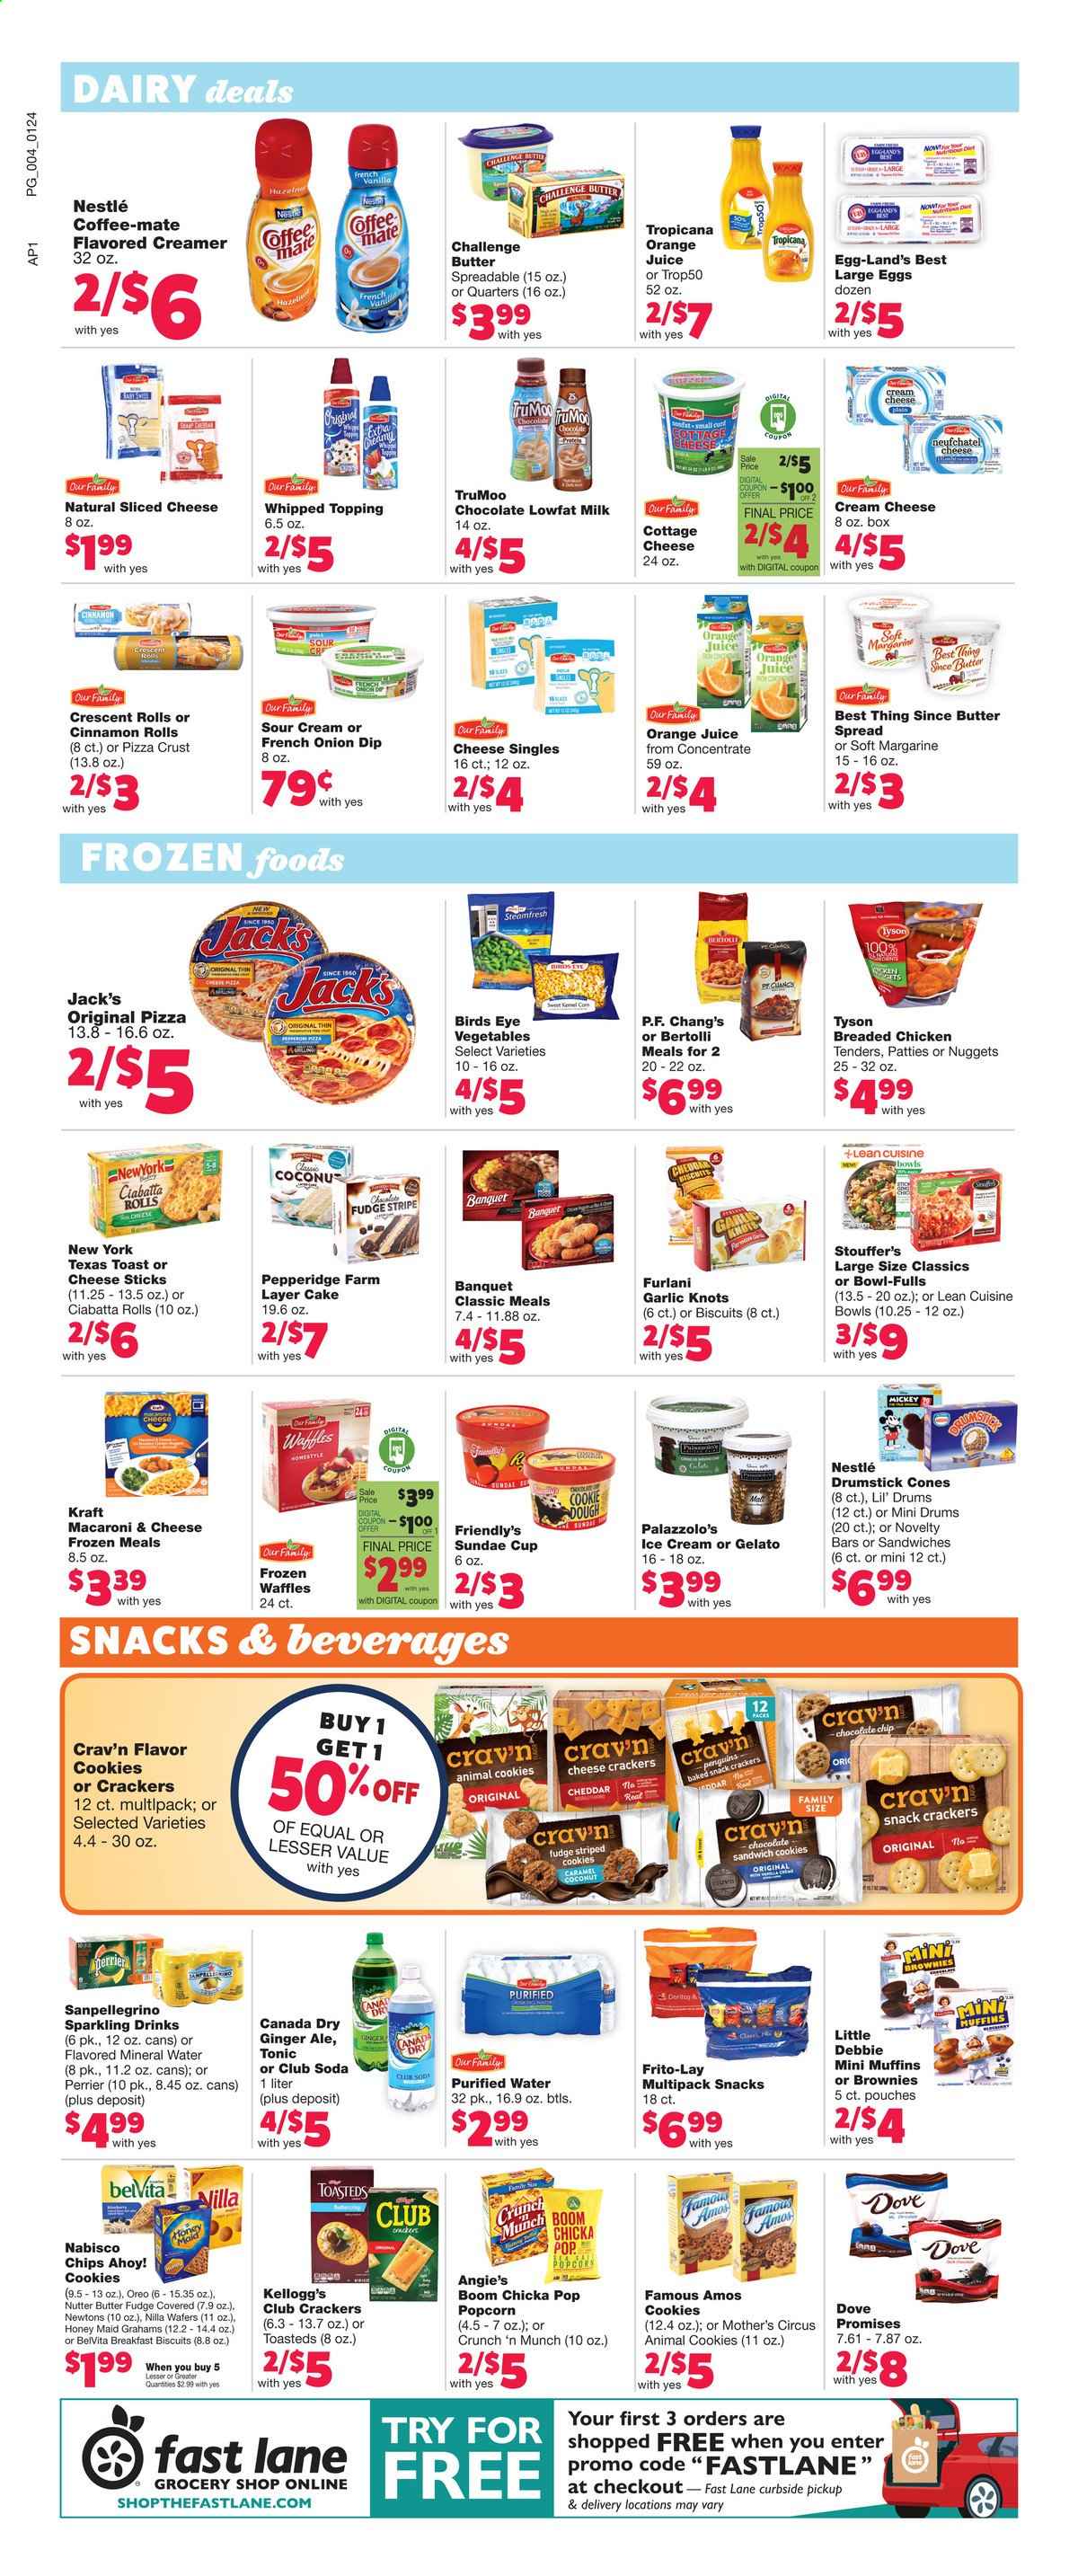 thumbnail - Family Fare Flyer - 01/24/2021 - 01/30/2021 - Sales products - ciabatta, toast bread, cinnamon roll, crescent rolls, cake, brownies, muffin, waffles, coconut, cream cheese, macaroni & cheese, pizza, sandwich, nuggets, fried chicken, Bird's Eye, Lean Cuisine, bowl-fulls, Kraft®, Bertolli, pepperoni, cottage cheese, Neufchâtel, sliced cheese, cheddar, Oreo, Coffee-Mate, milk, large eggs, butter, margarine, sour cream, creamer, dip, ice cream, Friendly's Ice Cream, gelato, Stouffer's, cookies, fudge, Nestlé, sandwich cookies, wafers, crackers, Kellogg's, biscuit, Chips Ahoy!, Doritos, snack, popcorn, Frito-Lay, cheese sticks, topping, garlic, belVita, Honey Maid, caramel, Canada Dry, ginger ale, orange juice, soda, juice, tonic, Perrier, Club Soda, mineral water, purified water, chicken tenders, Mickey Mouse, Dove, cup. Page 6.